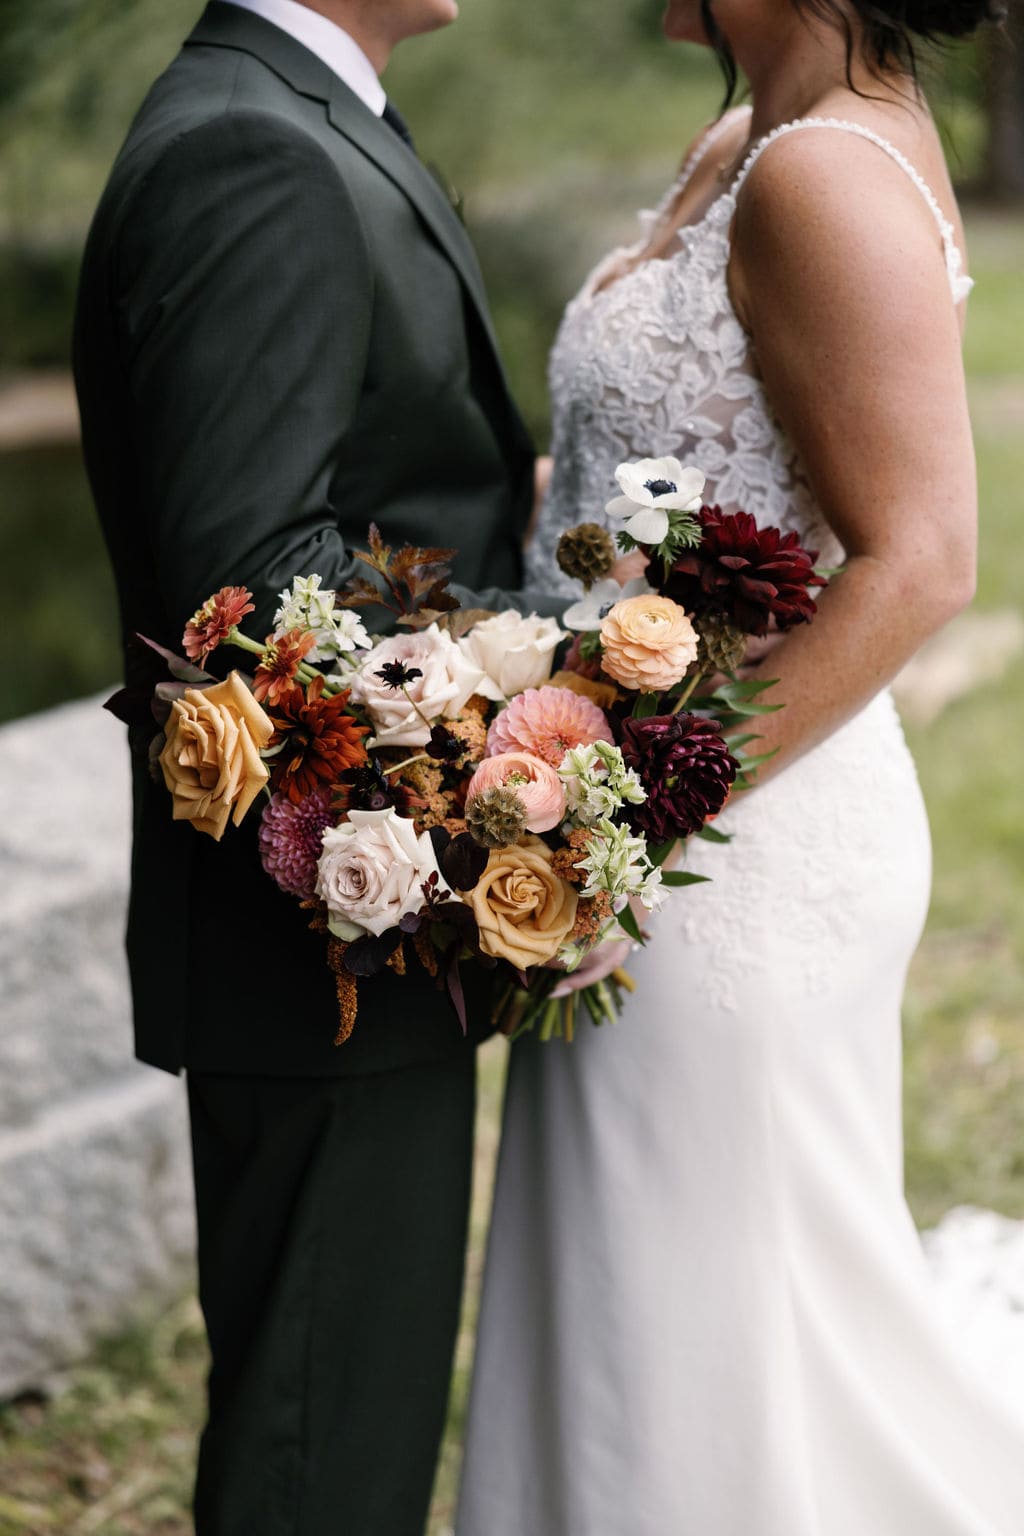 Bride and groom and bridal bouquet at Blackstone Rivers Ranch in Idaho Springs Colorado during their rainy wedding